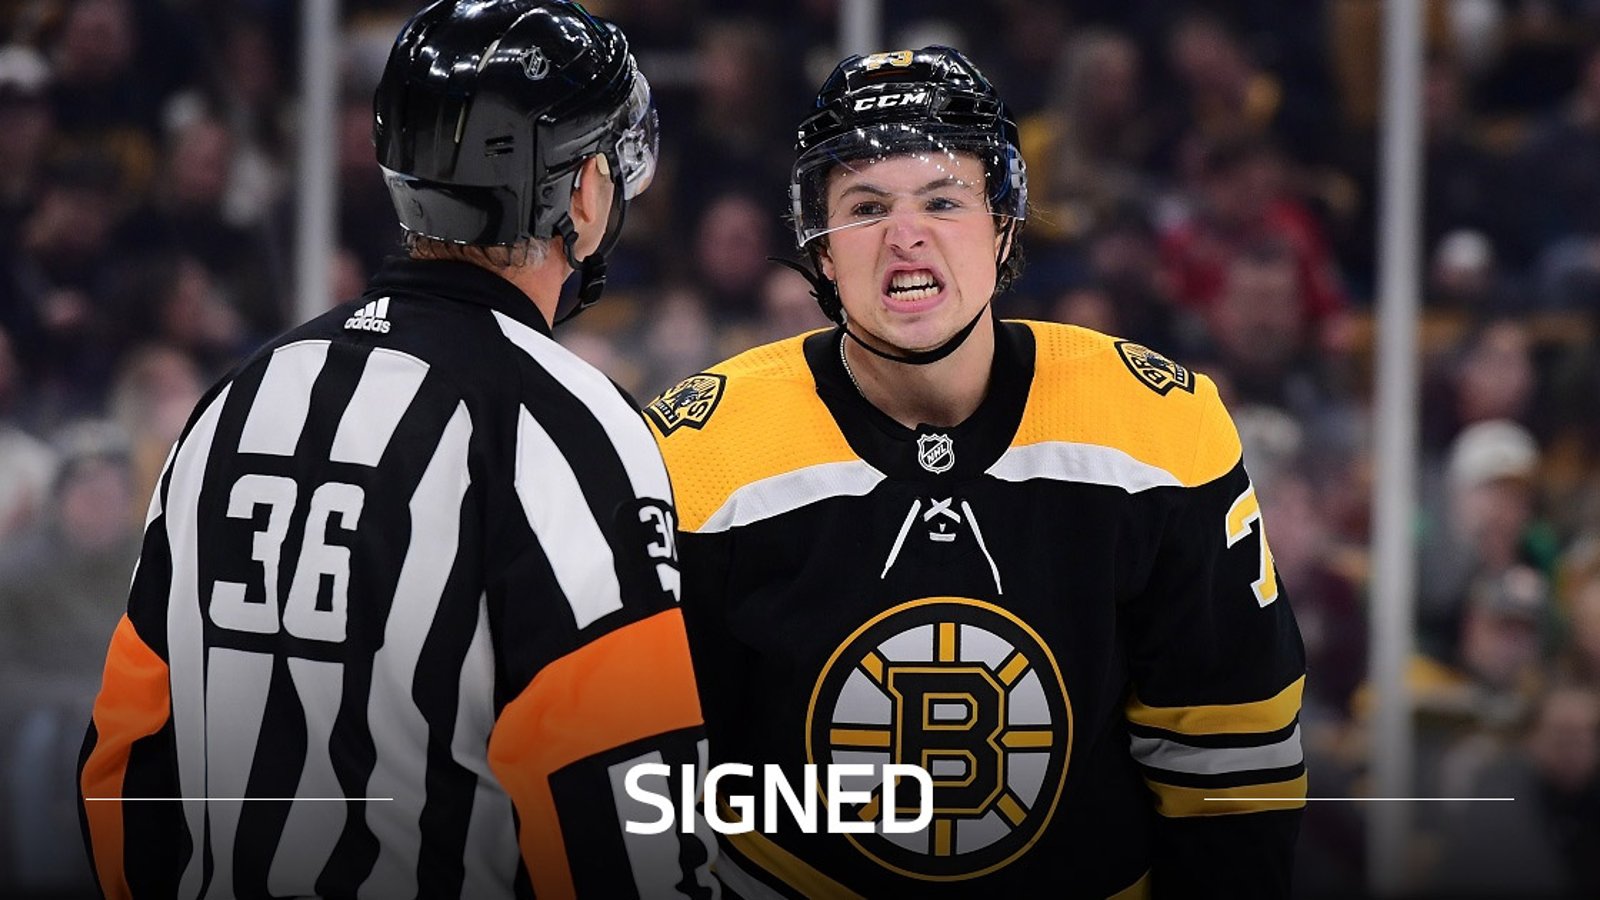 Breaking: Bruins sign Charlie McAvoy to a brand new deal.